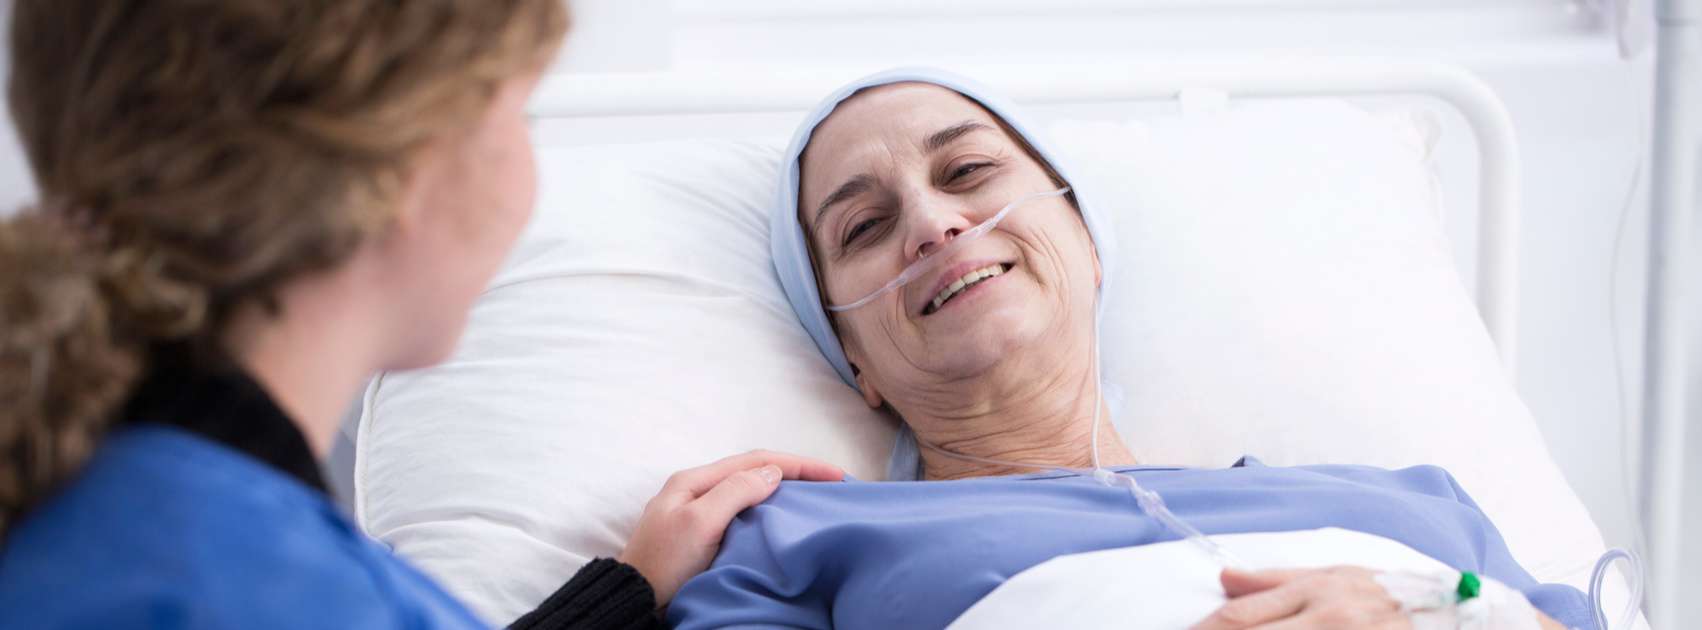 Sick Woman in Bed receiving comfort care from nurse